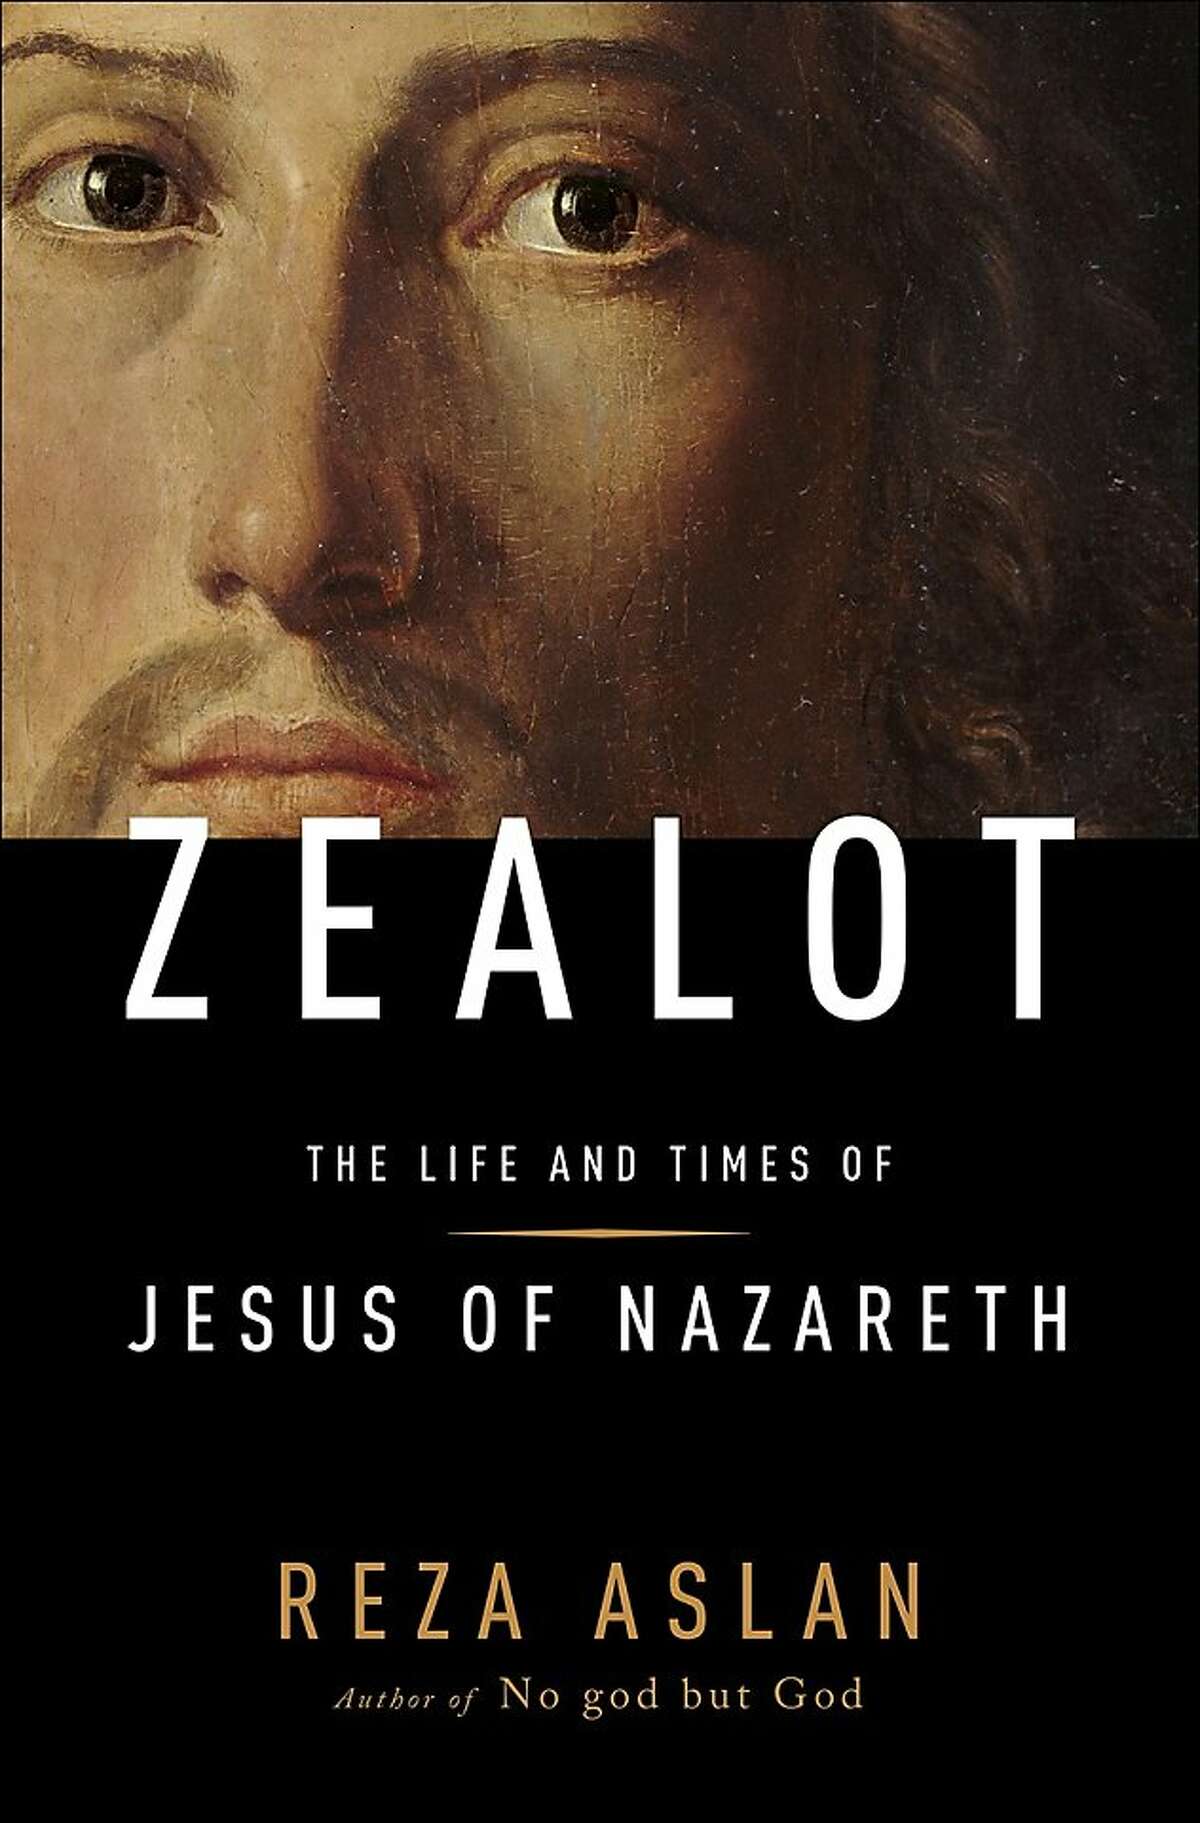 Zealot: The Life and Times of Jesus of Nazareth, by Reza Aslan